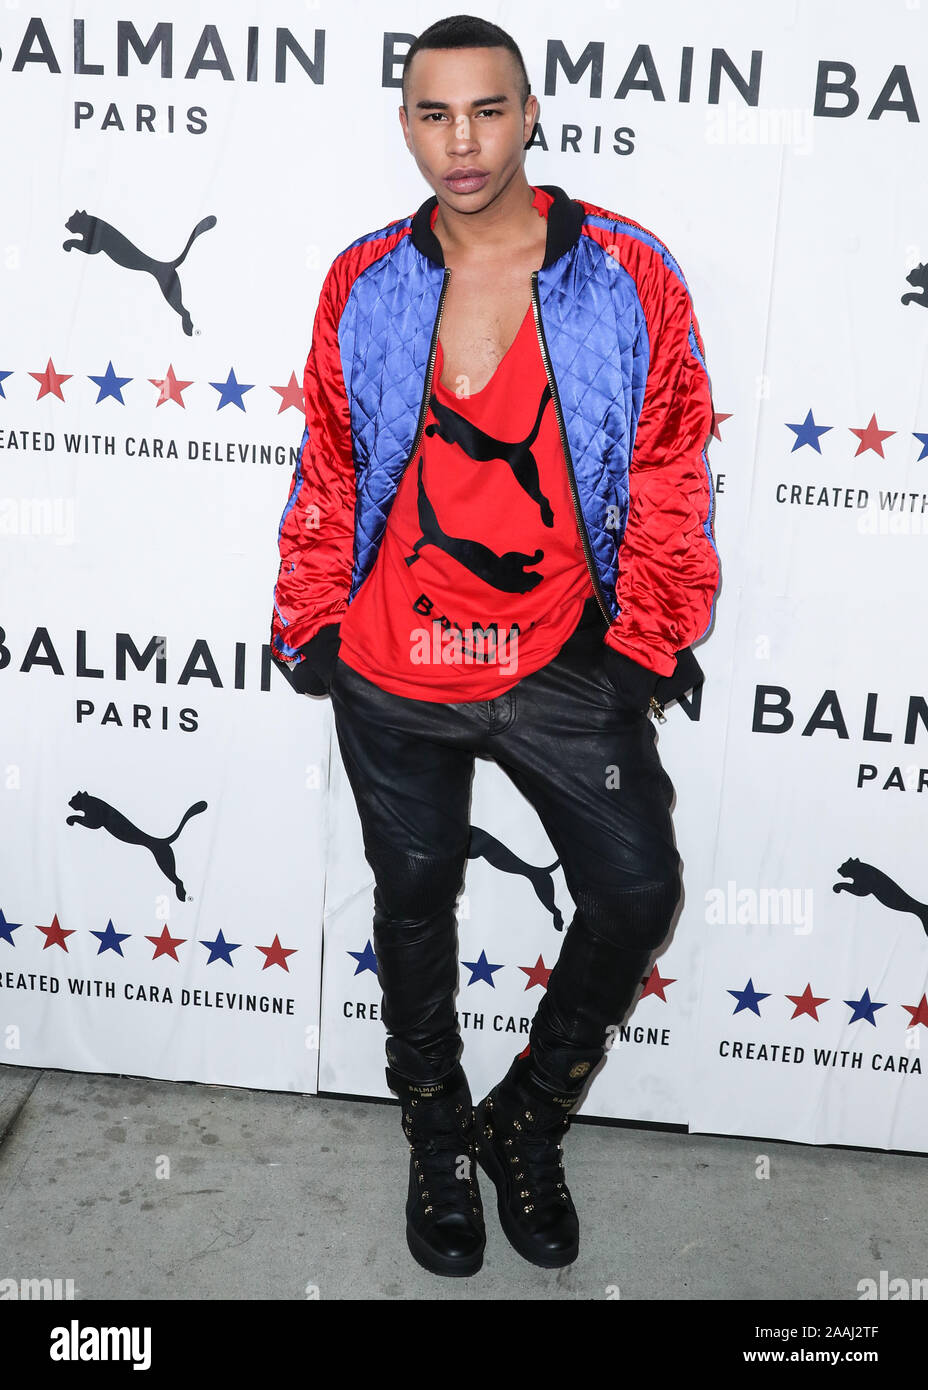 HOLLYWOOD, LOS ANGELES, CALIFORNIA, USA - NOVEMBER 21: Designer Olivier  Rousteing arrives at the PUMA x Balmain Los Angeles Launch Event held at  Milk Studios on November 21, 2019 in Hollywood, Los